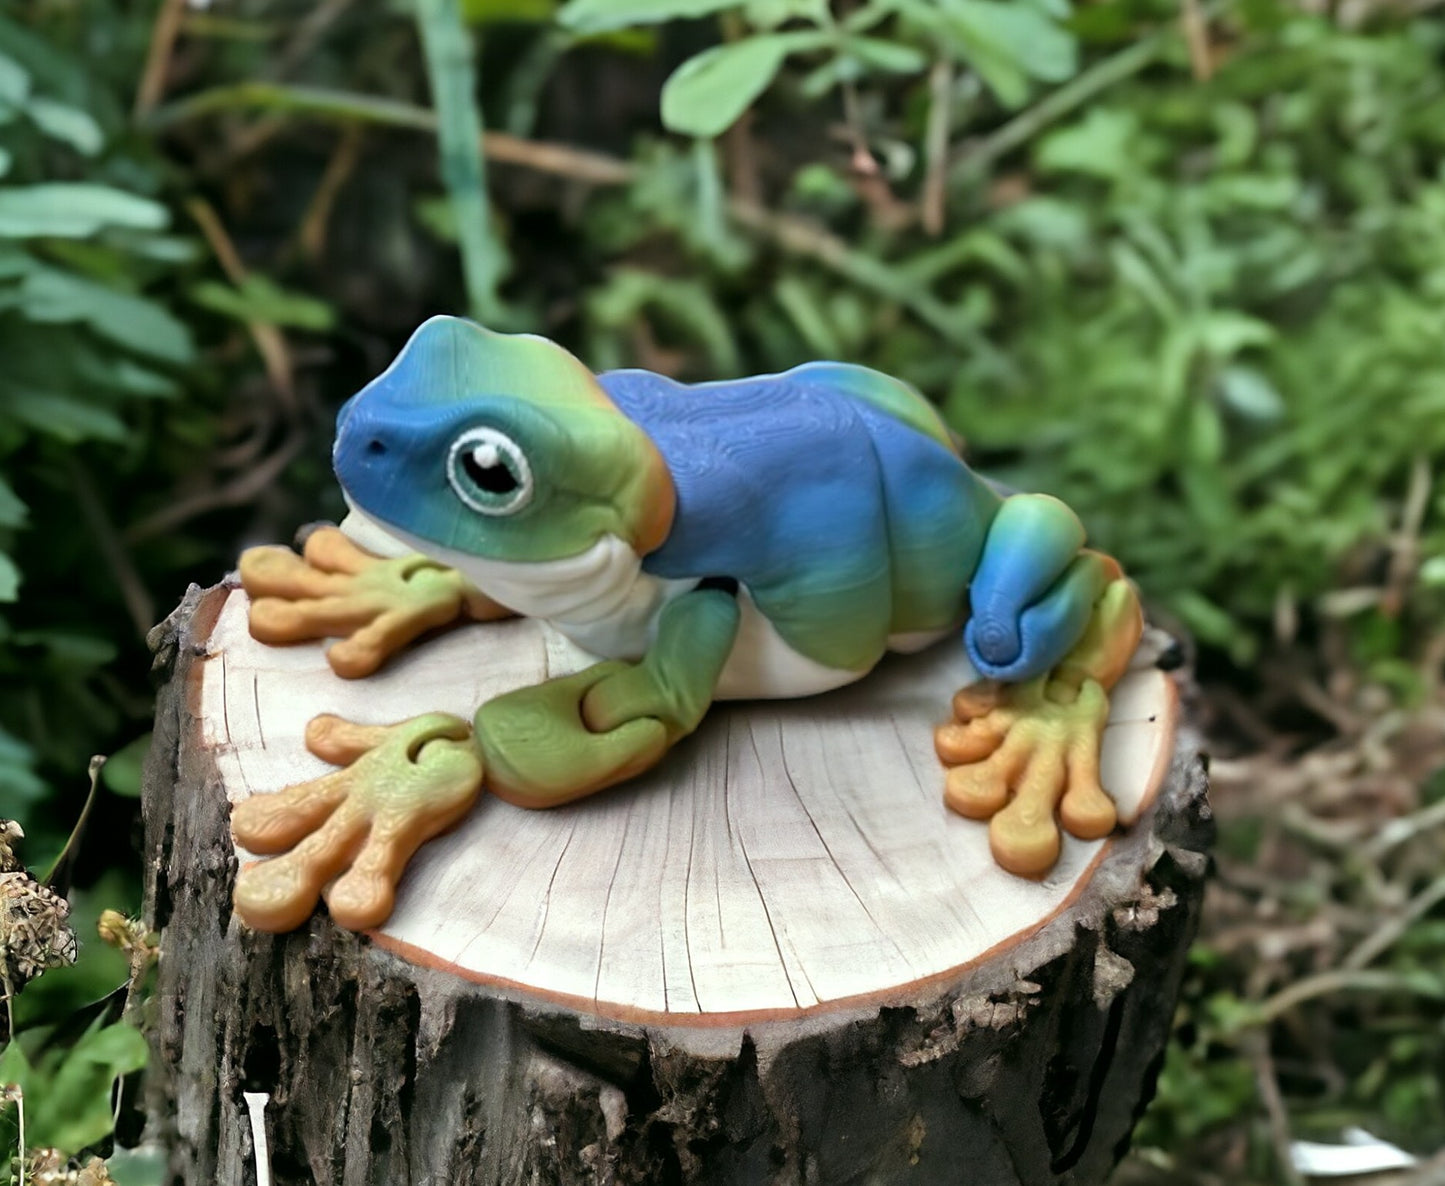 Limited Color Run Rainbow - White's Tree Frog